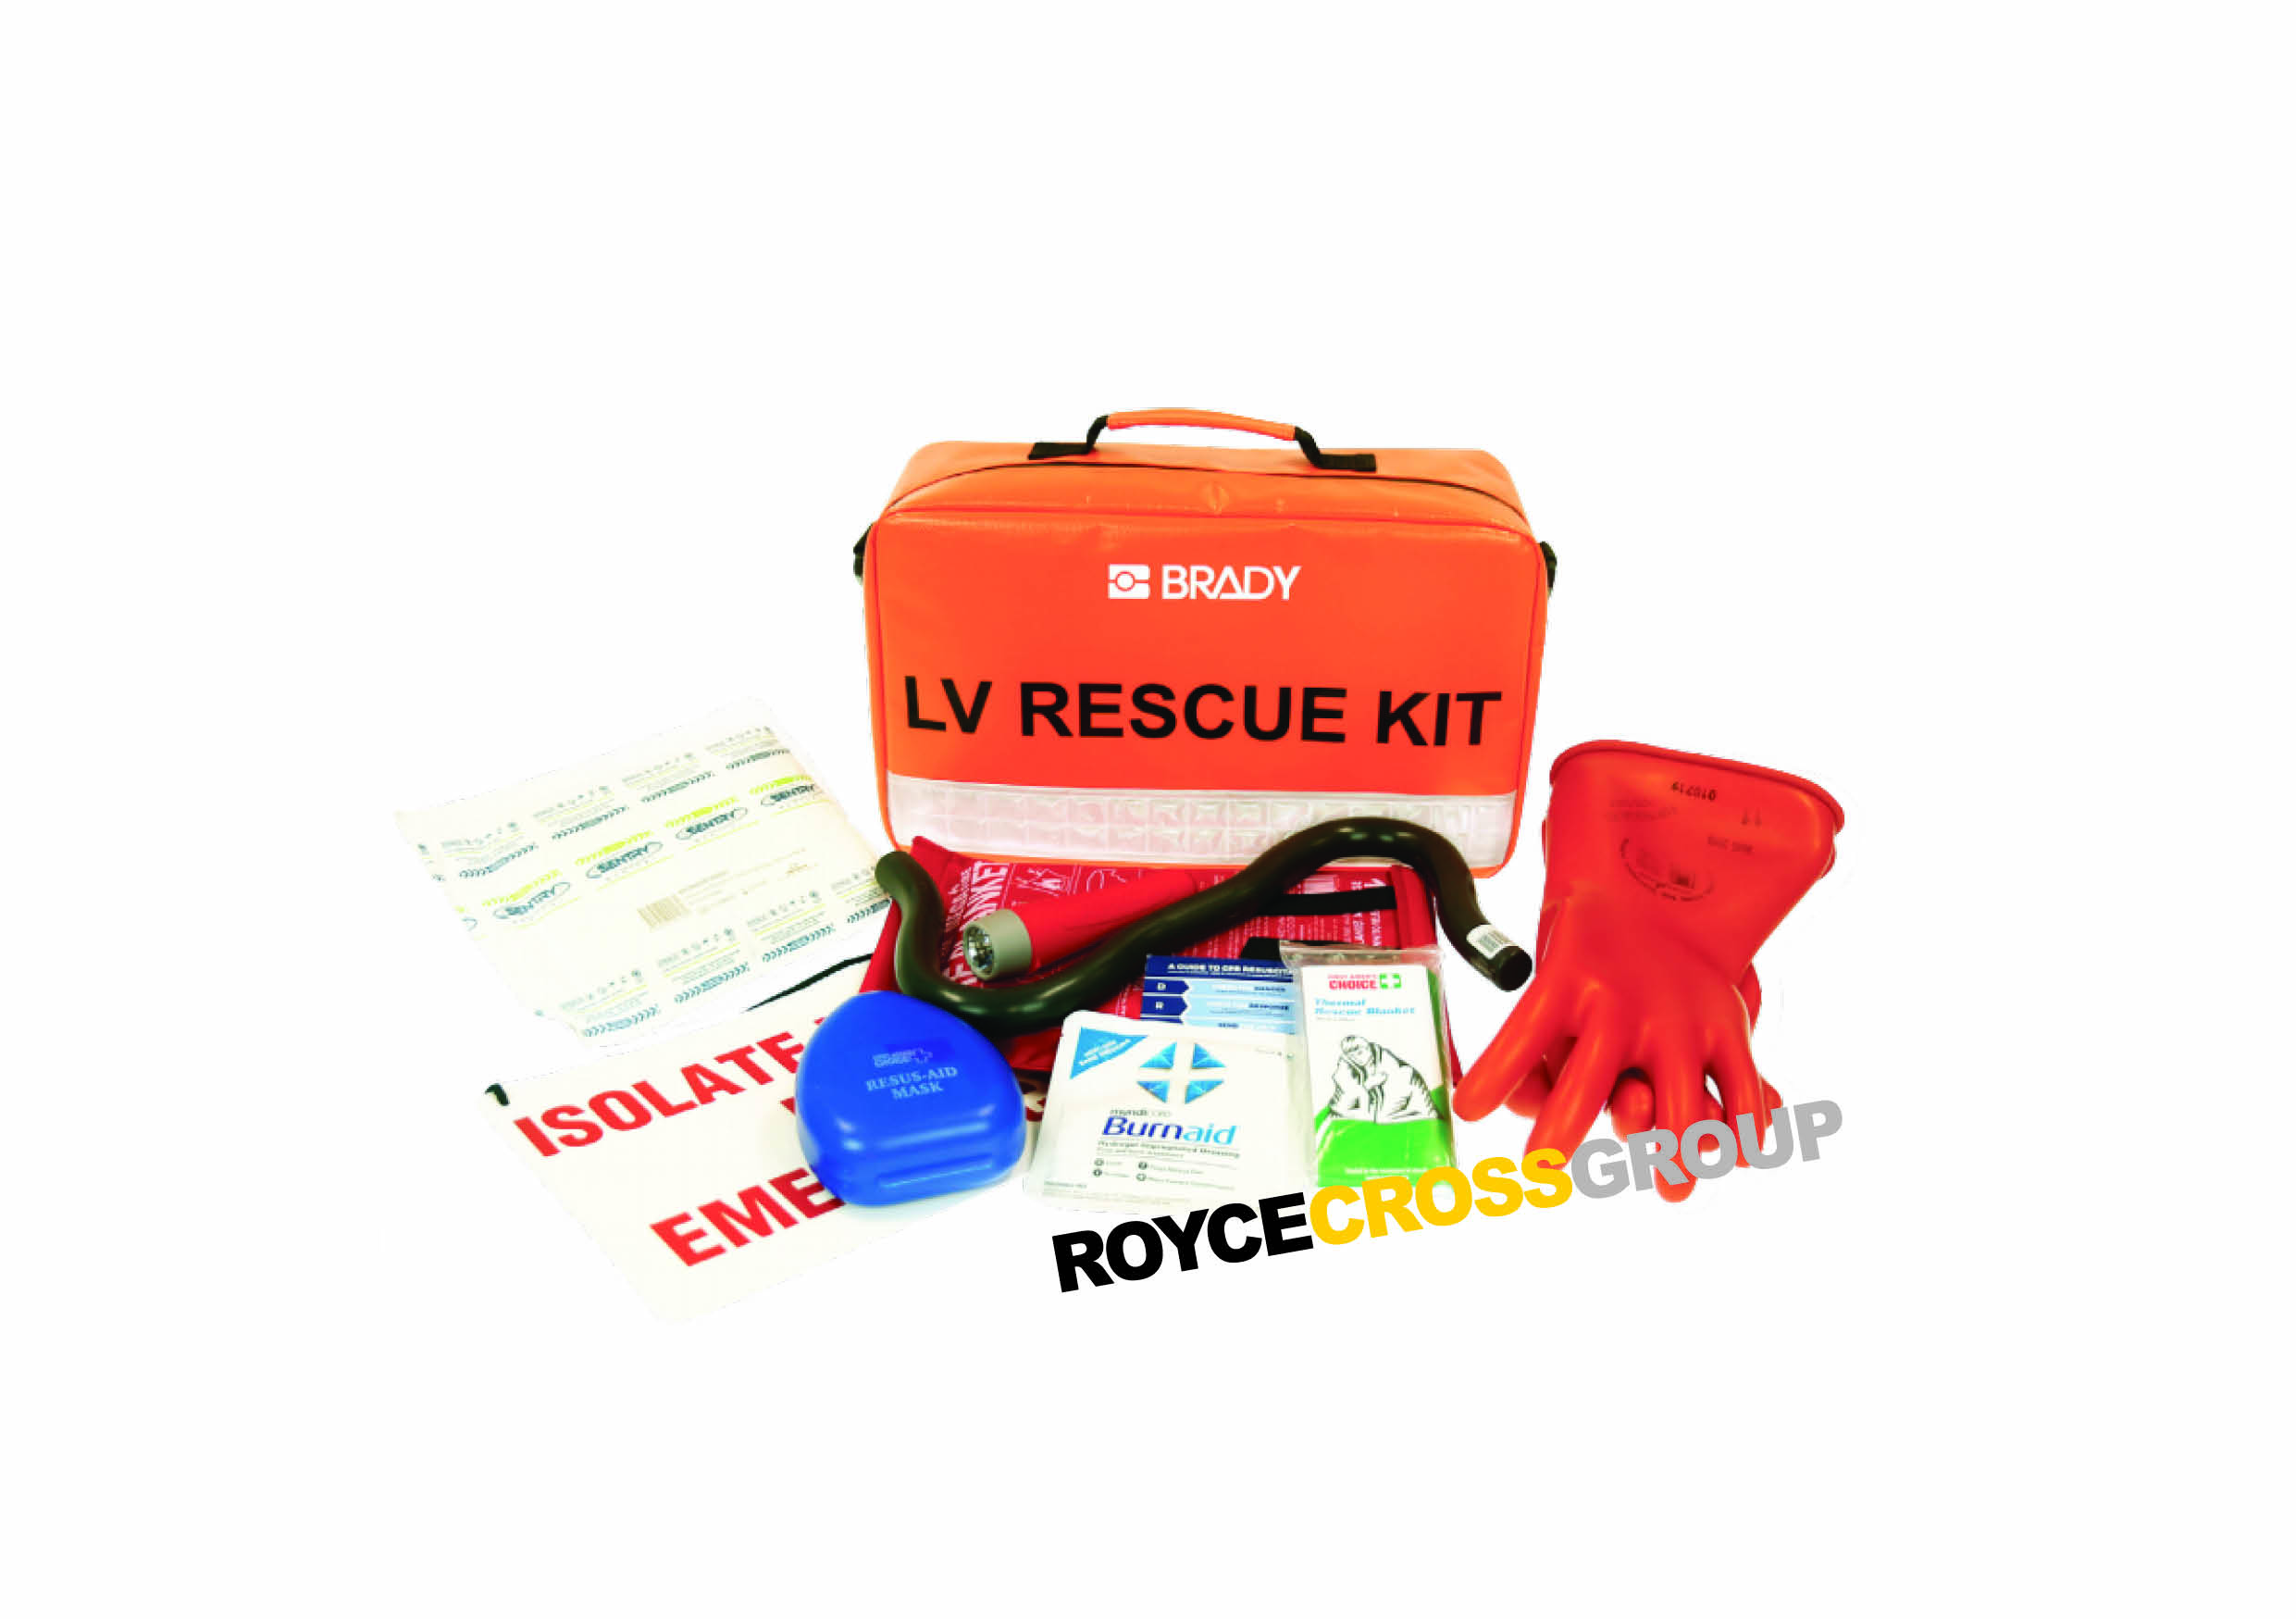 Introducing the new Brady LV rescue kit